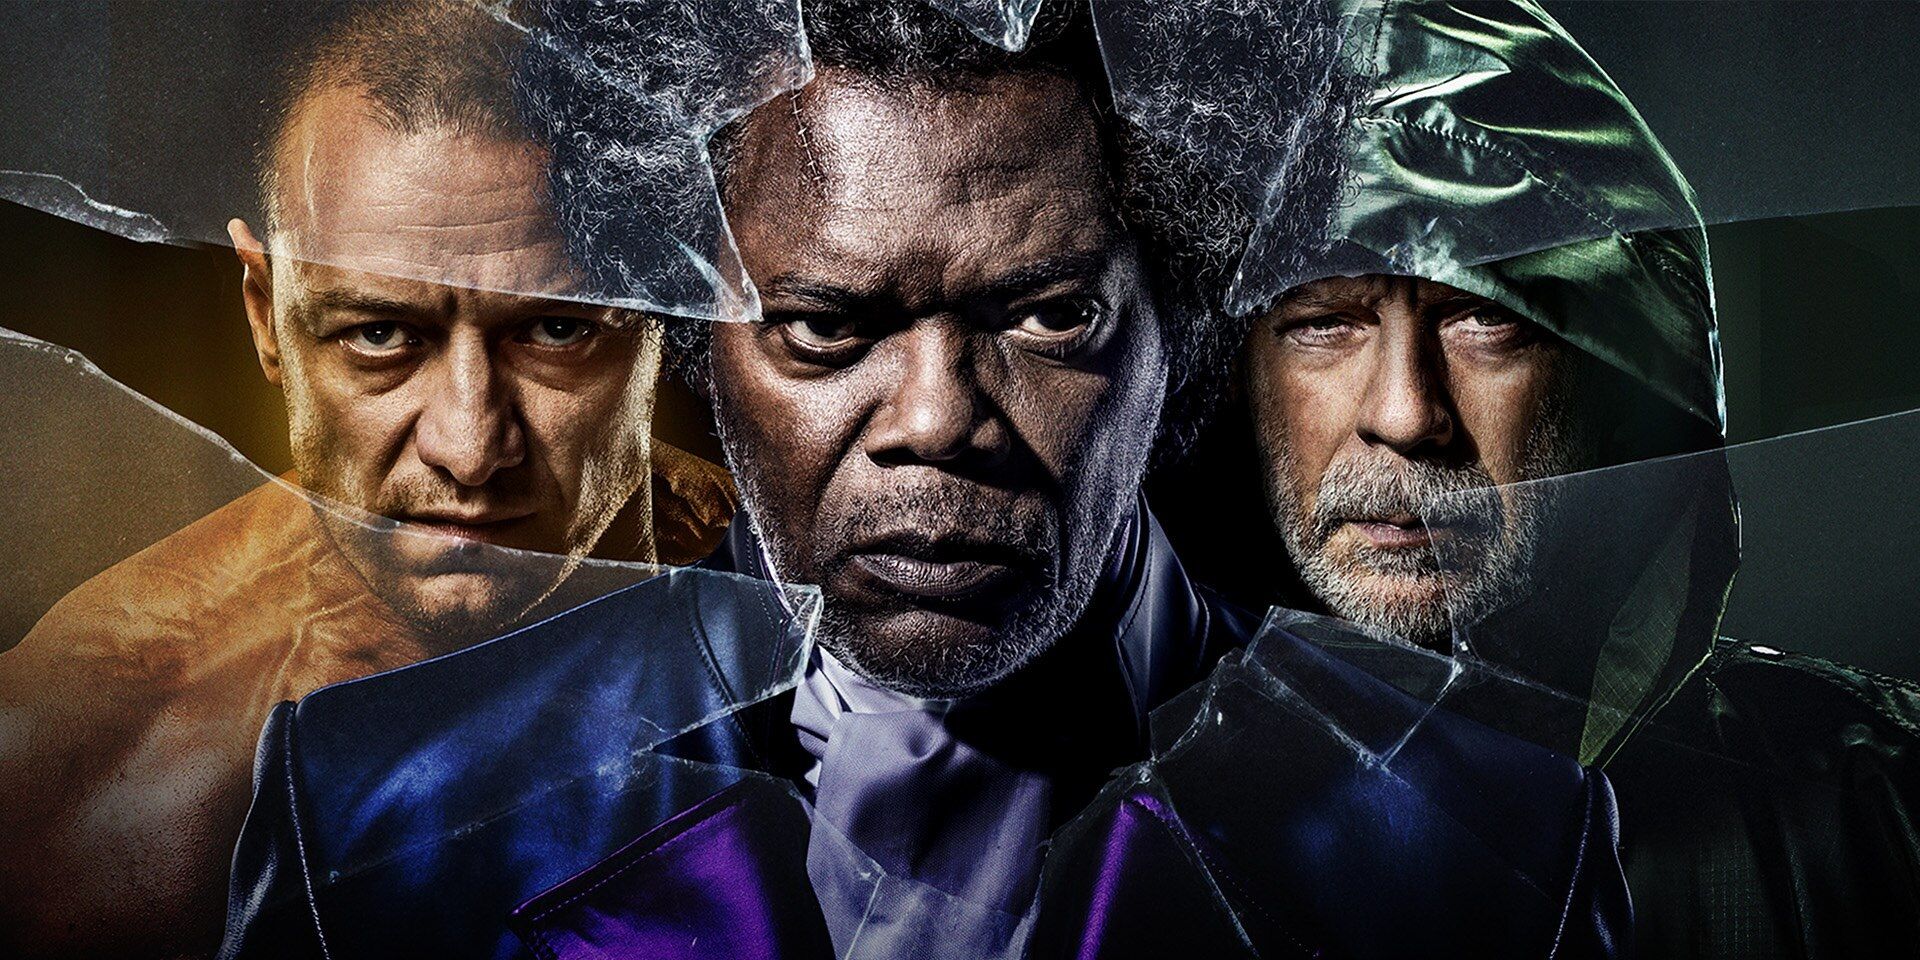 How To Watch The Unbreakable Trilogy In Order: Where Do Split & Glass Fit?